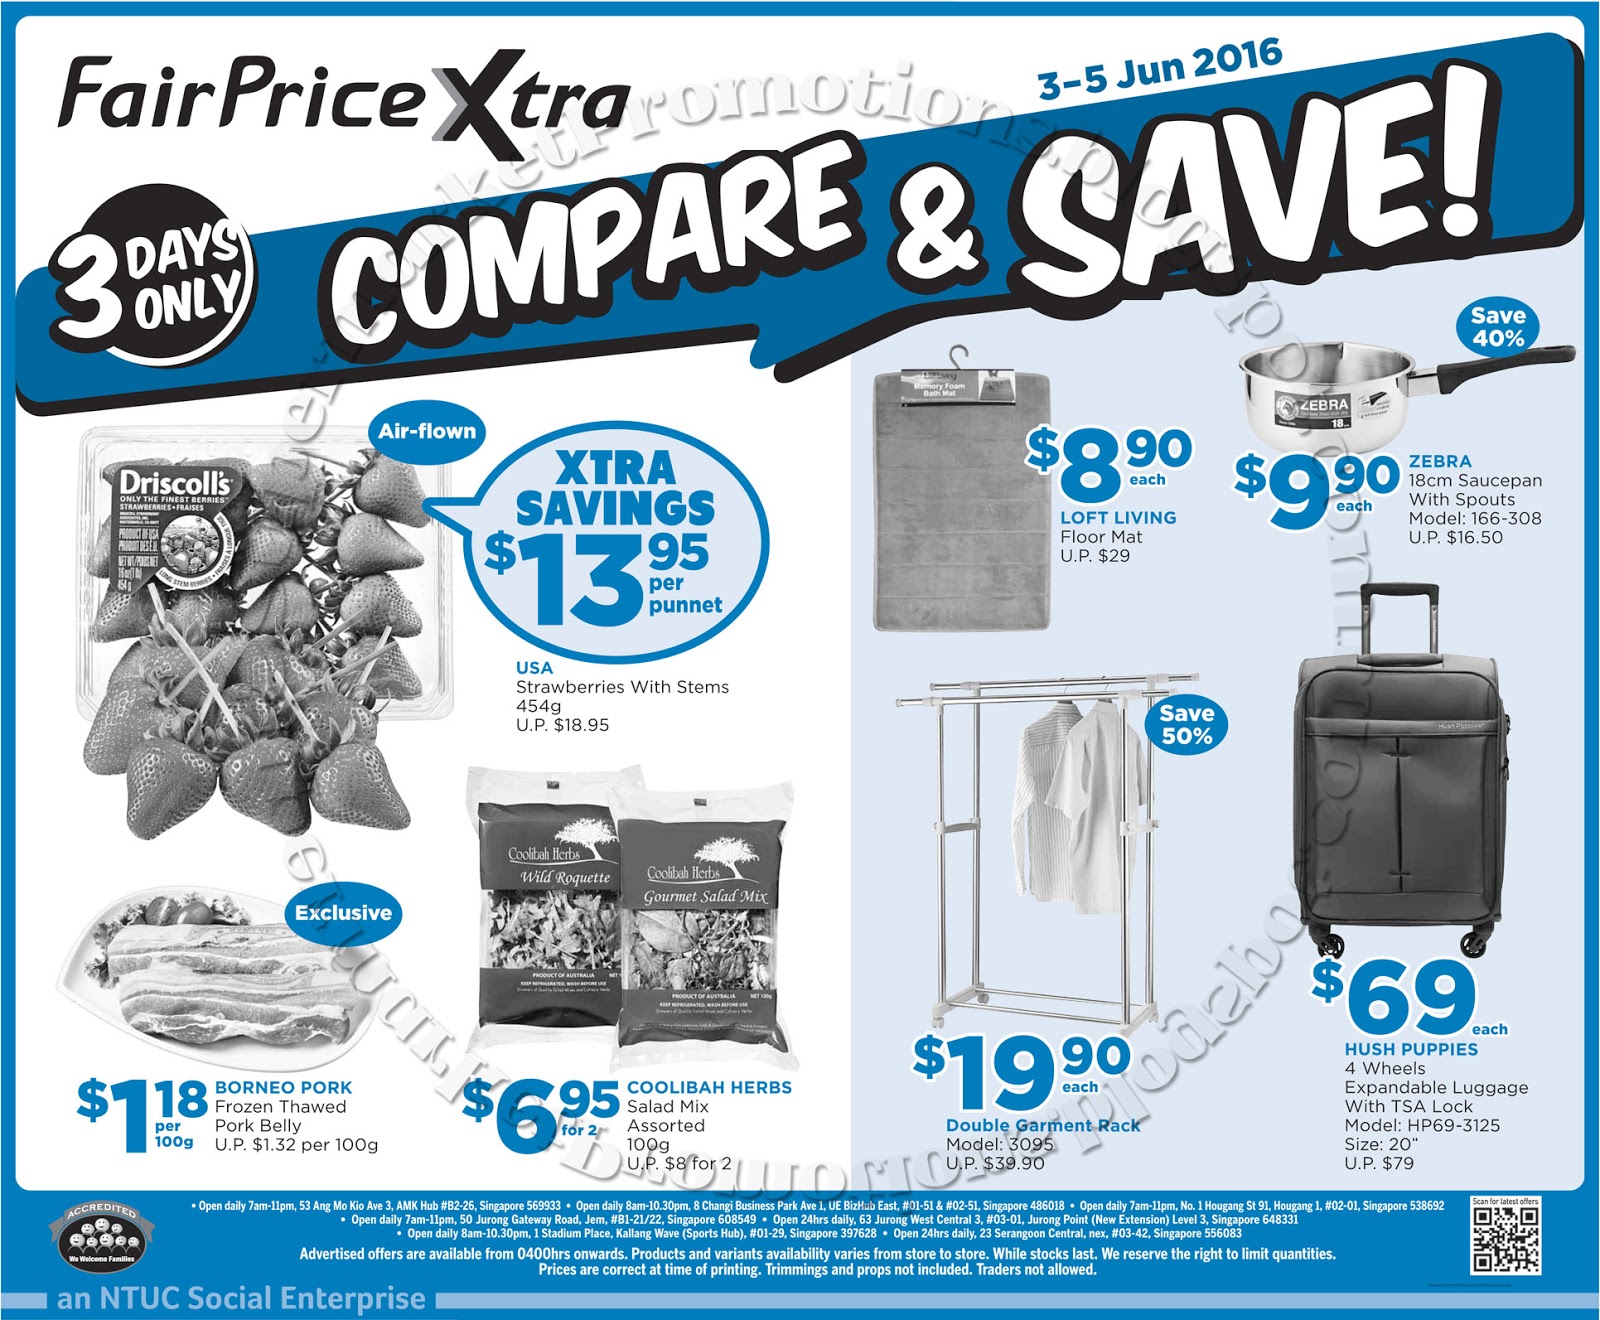 NTUC FairPrice Xtra Compare & Save! 03 - 05 ~ Promotions